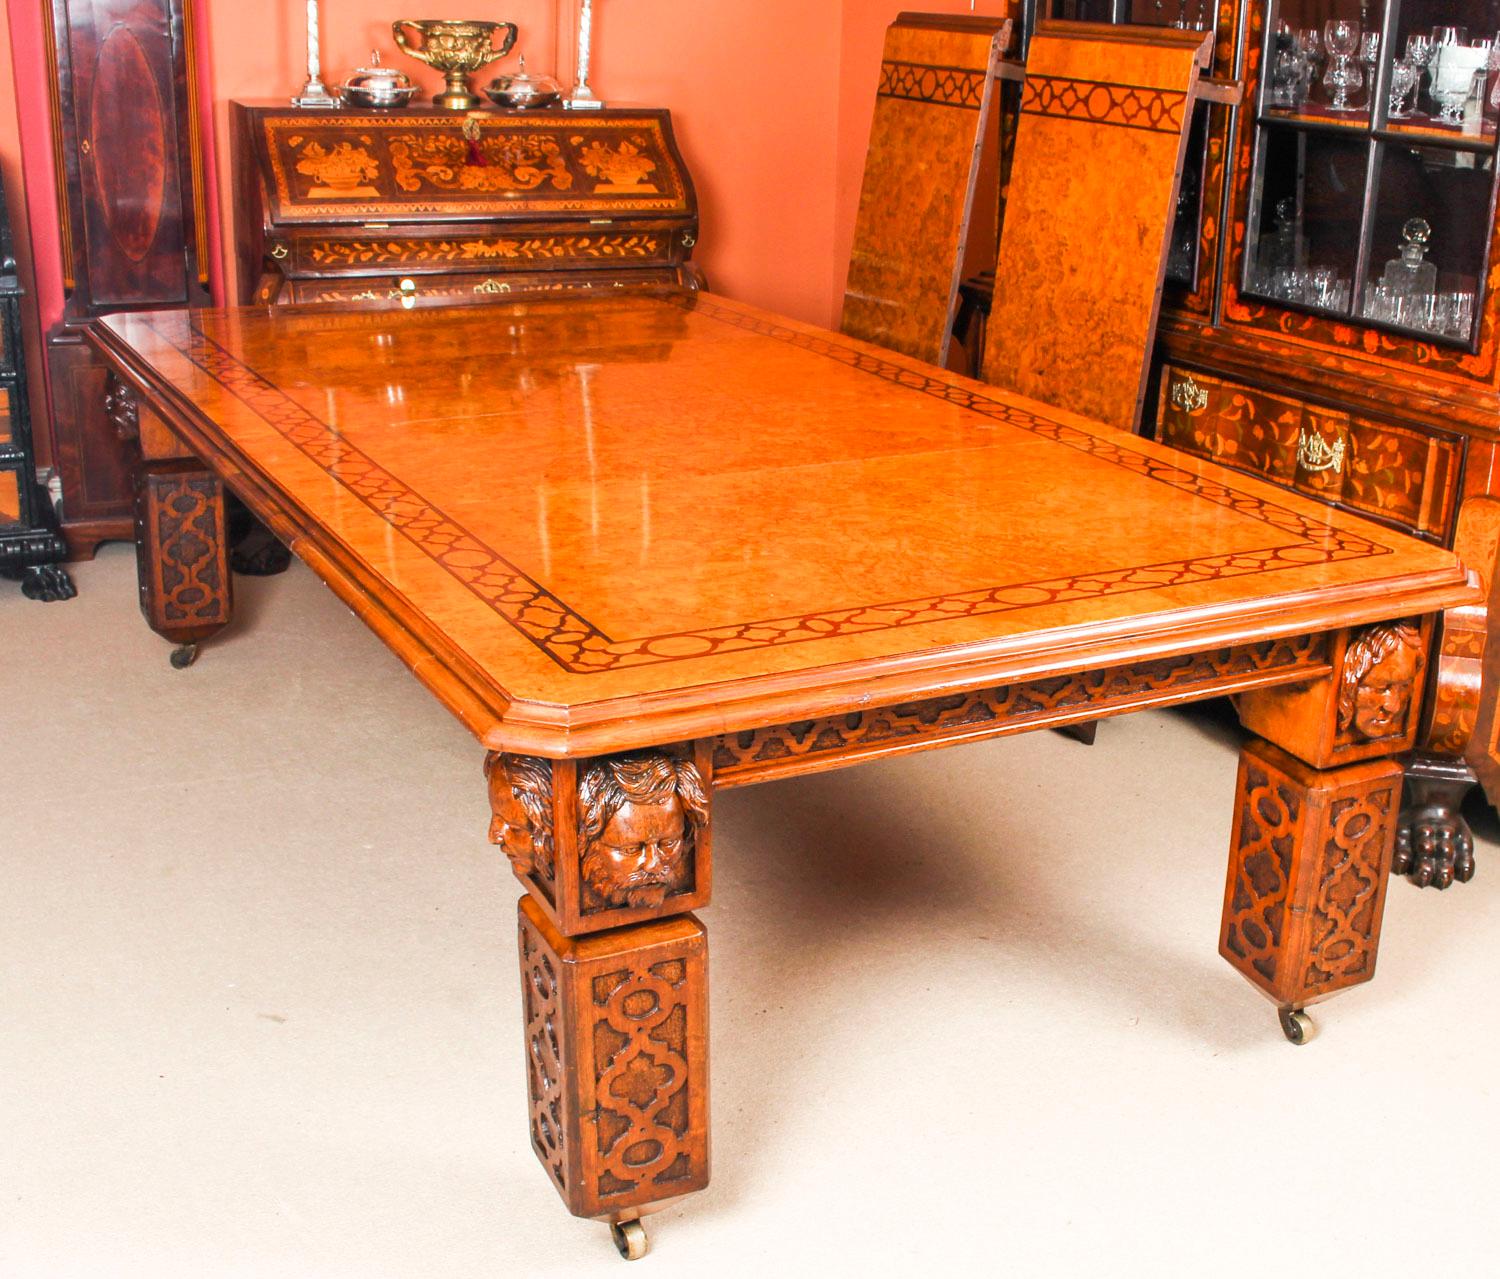 Antique Elizabethan Revival Pollard Oak Dining Table 19th Century and 14 Chairs In Good Condition For Sale In London, GB